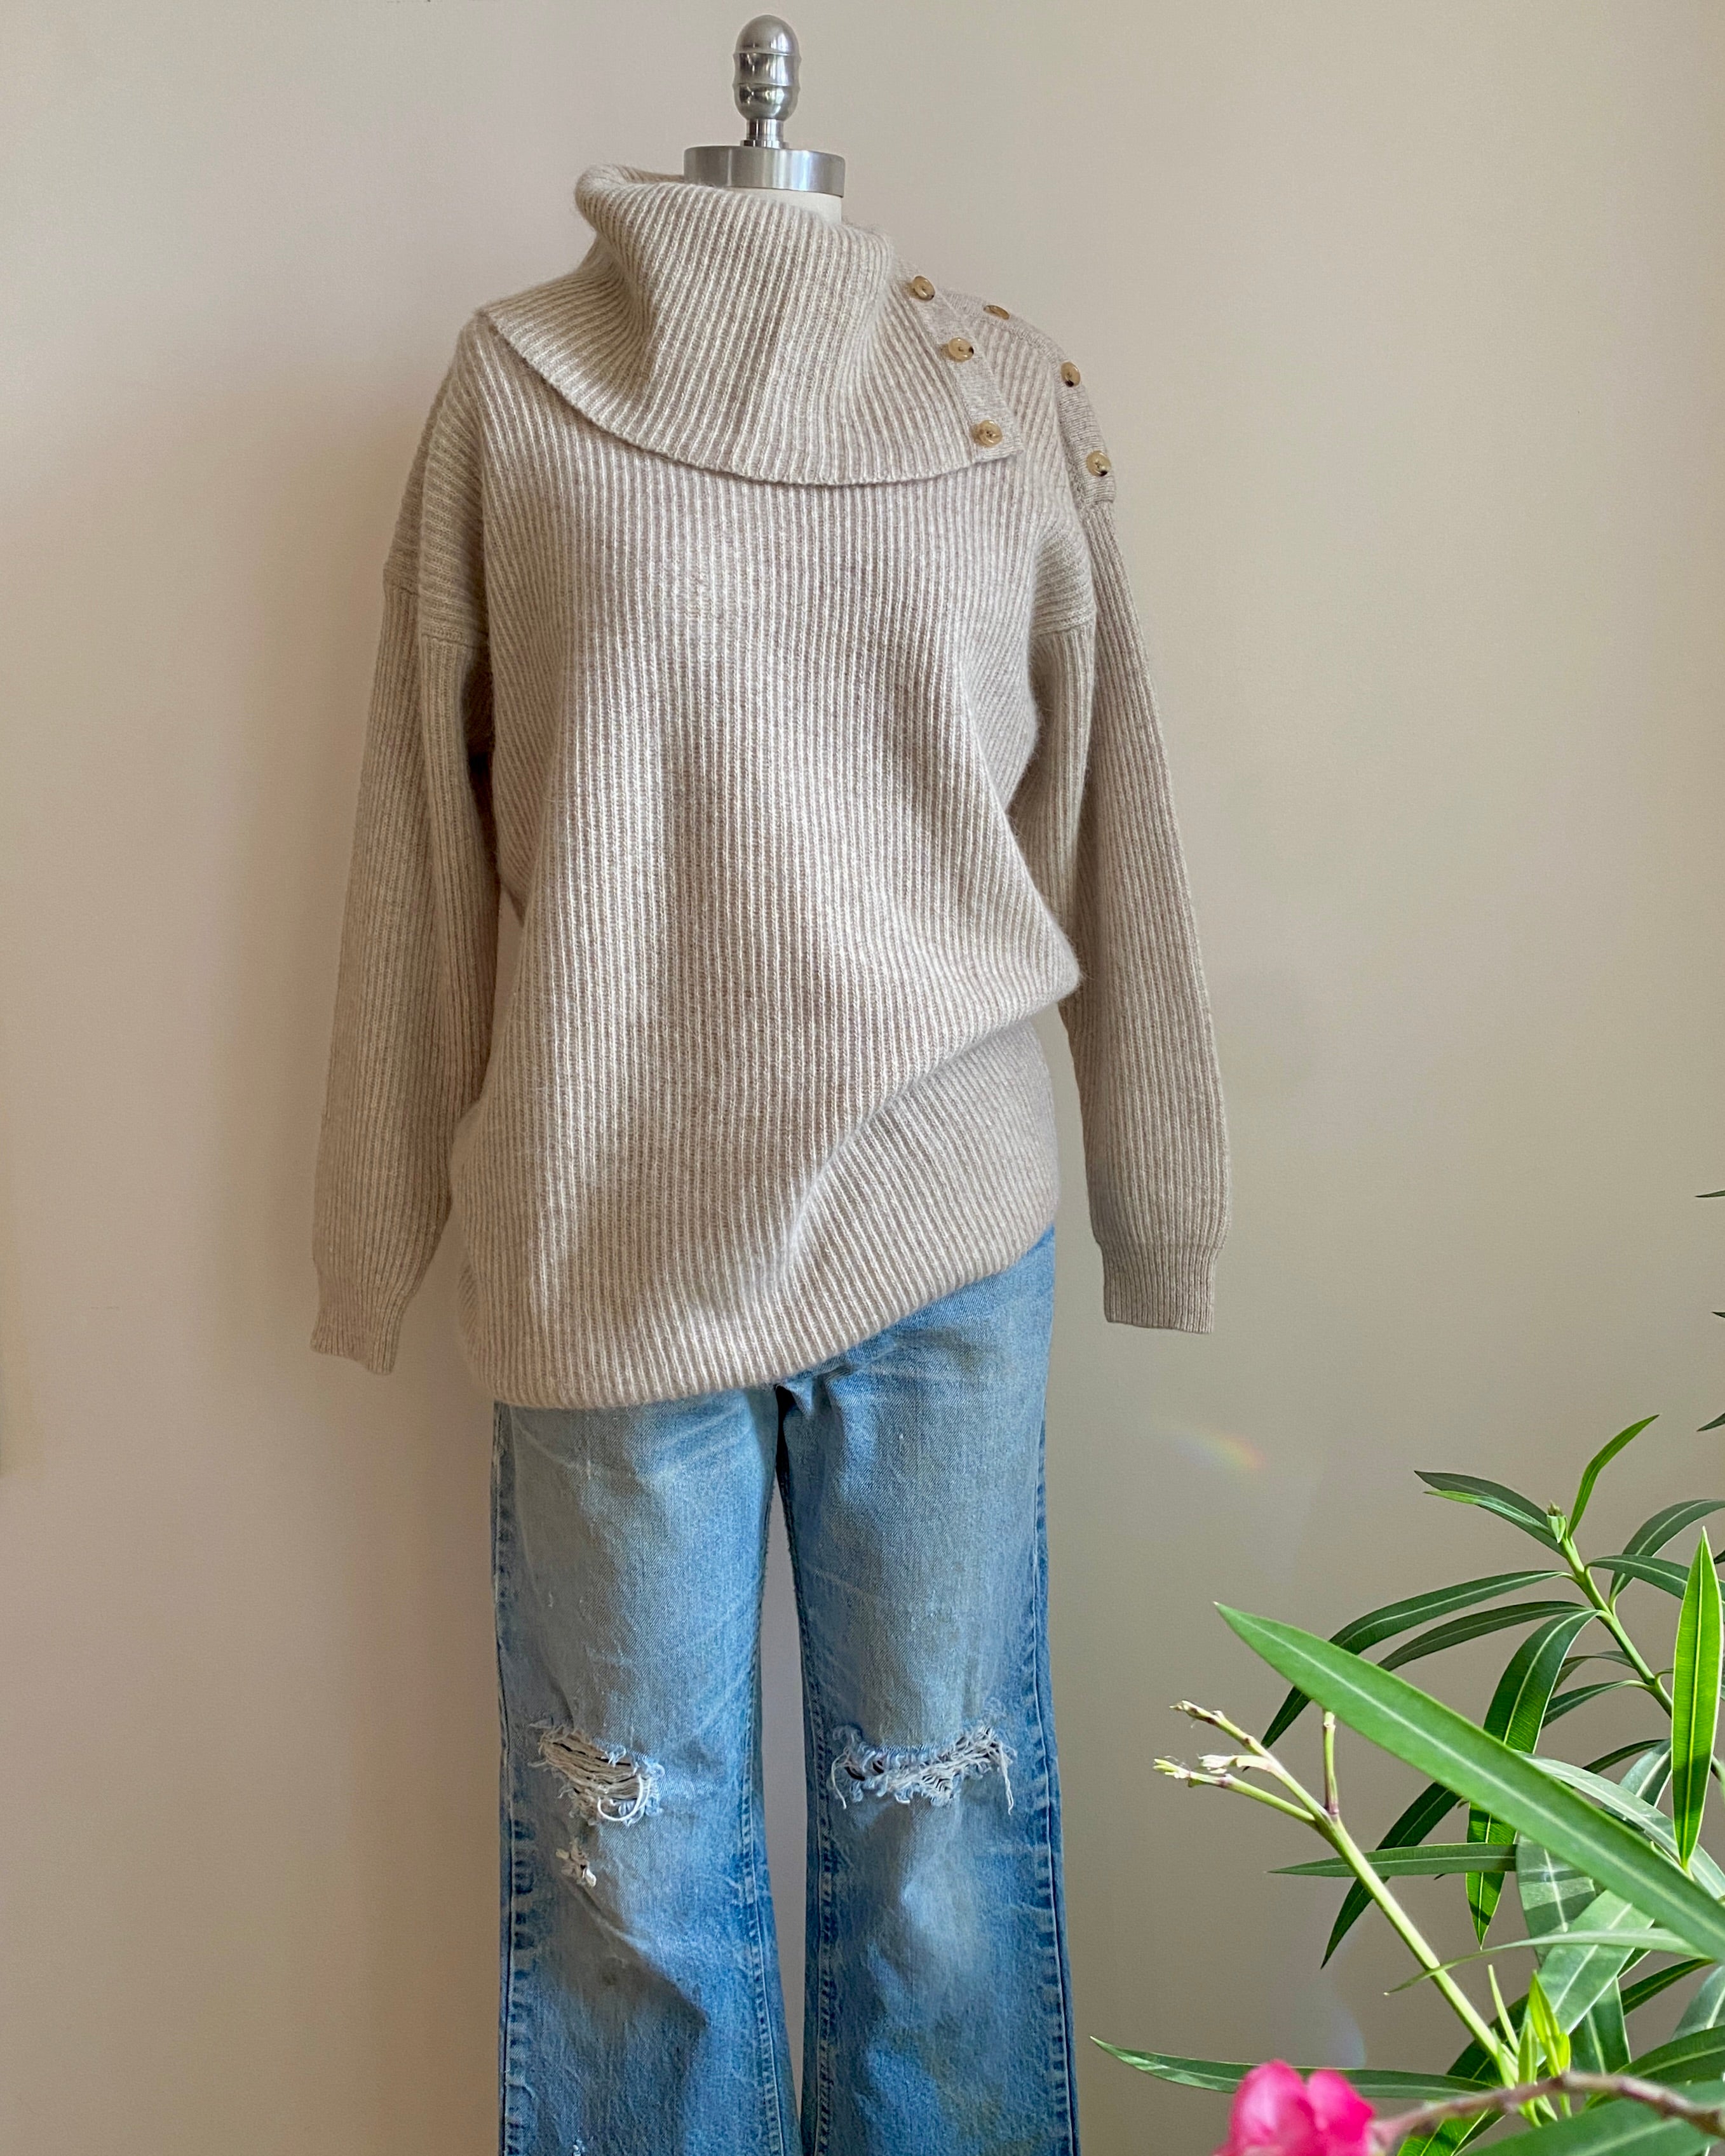 Vintage 1990s Casual Corner Tan Marle Rib Wool Angora Blend Turtleneck with Buttons Sweater M